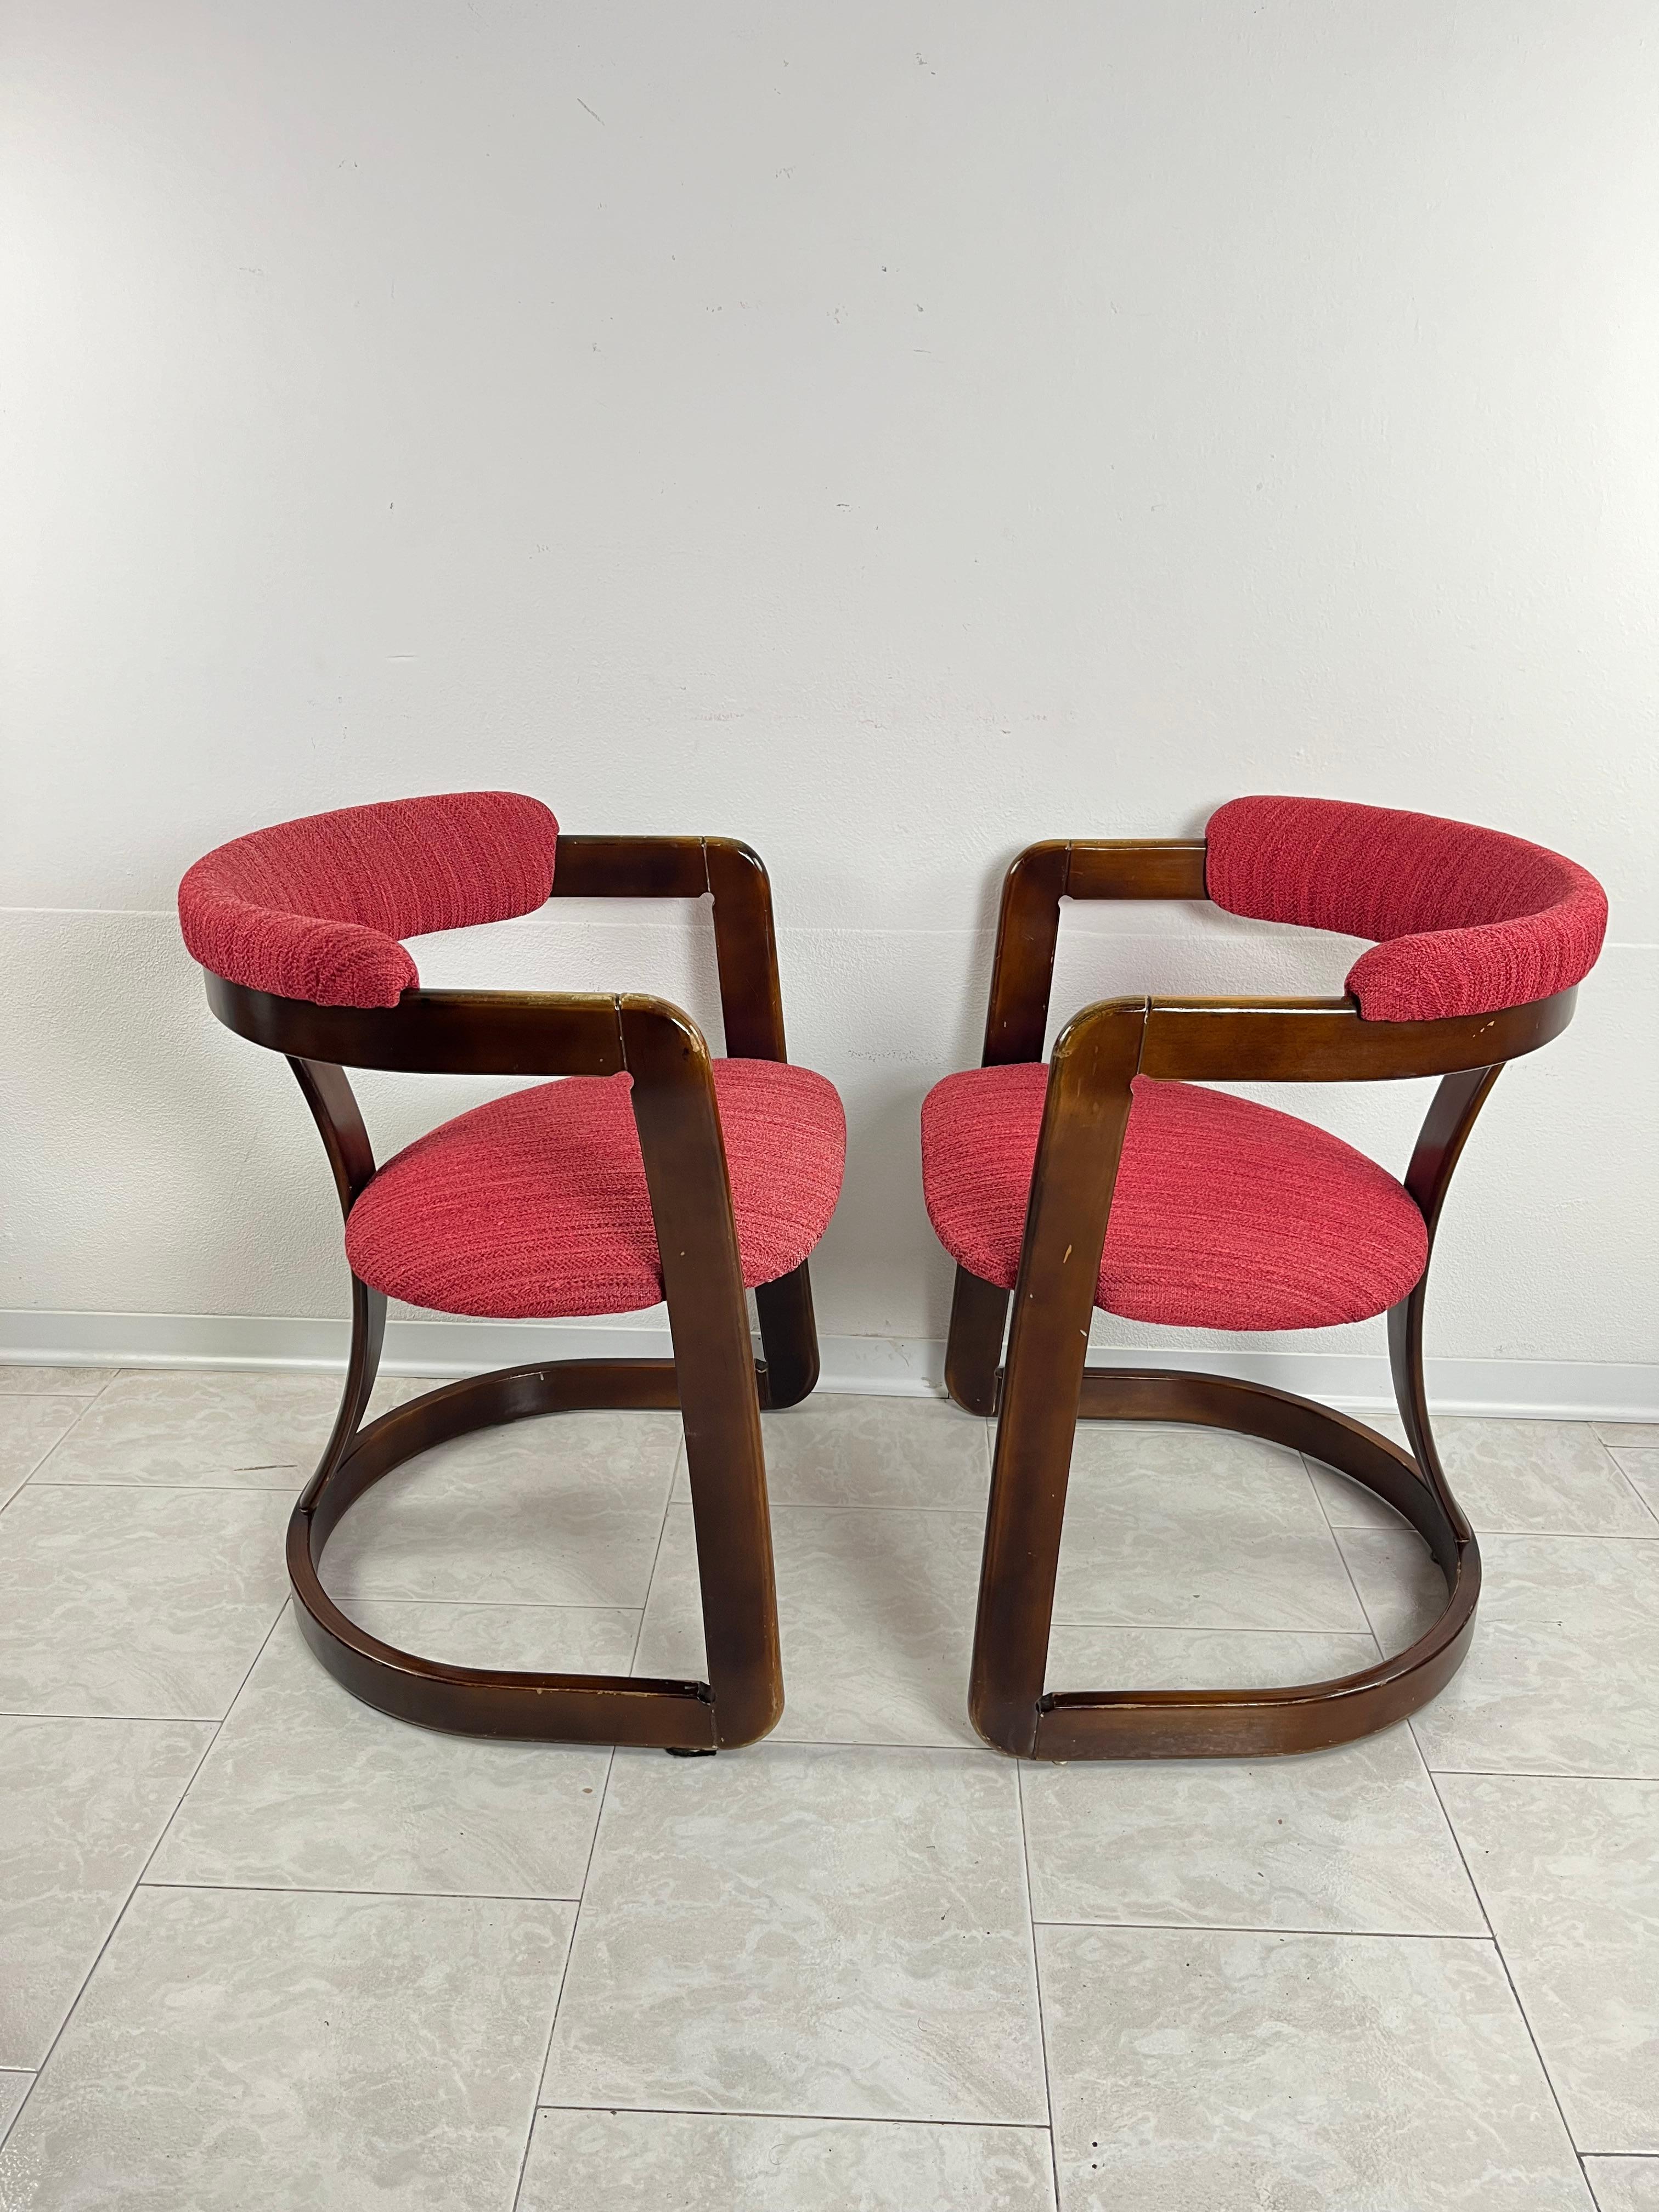 Set of 2 Mid-Century Curved Wooden Chairs Attributed to A. & P. Castiglioni For Sale 1